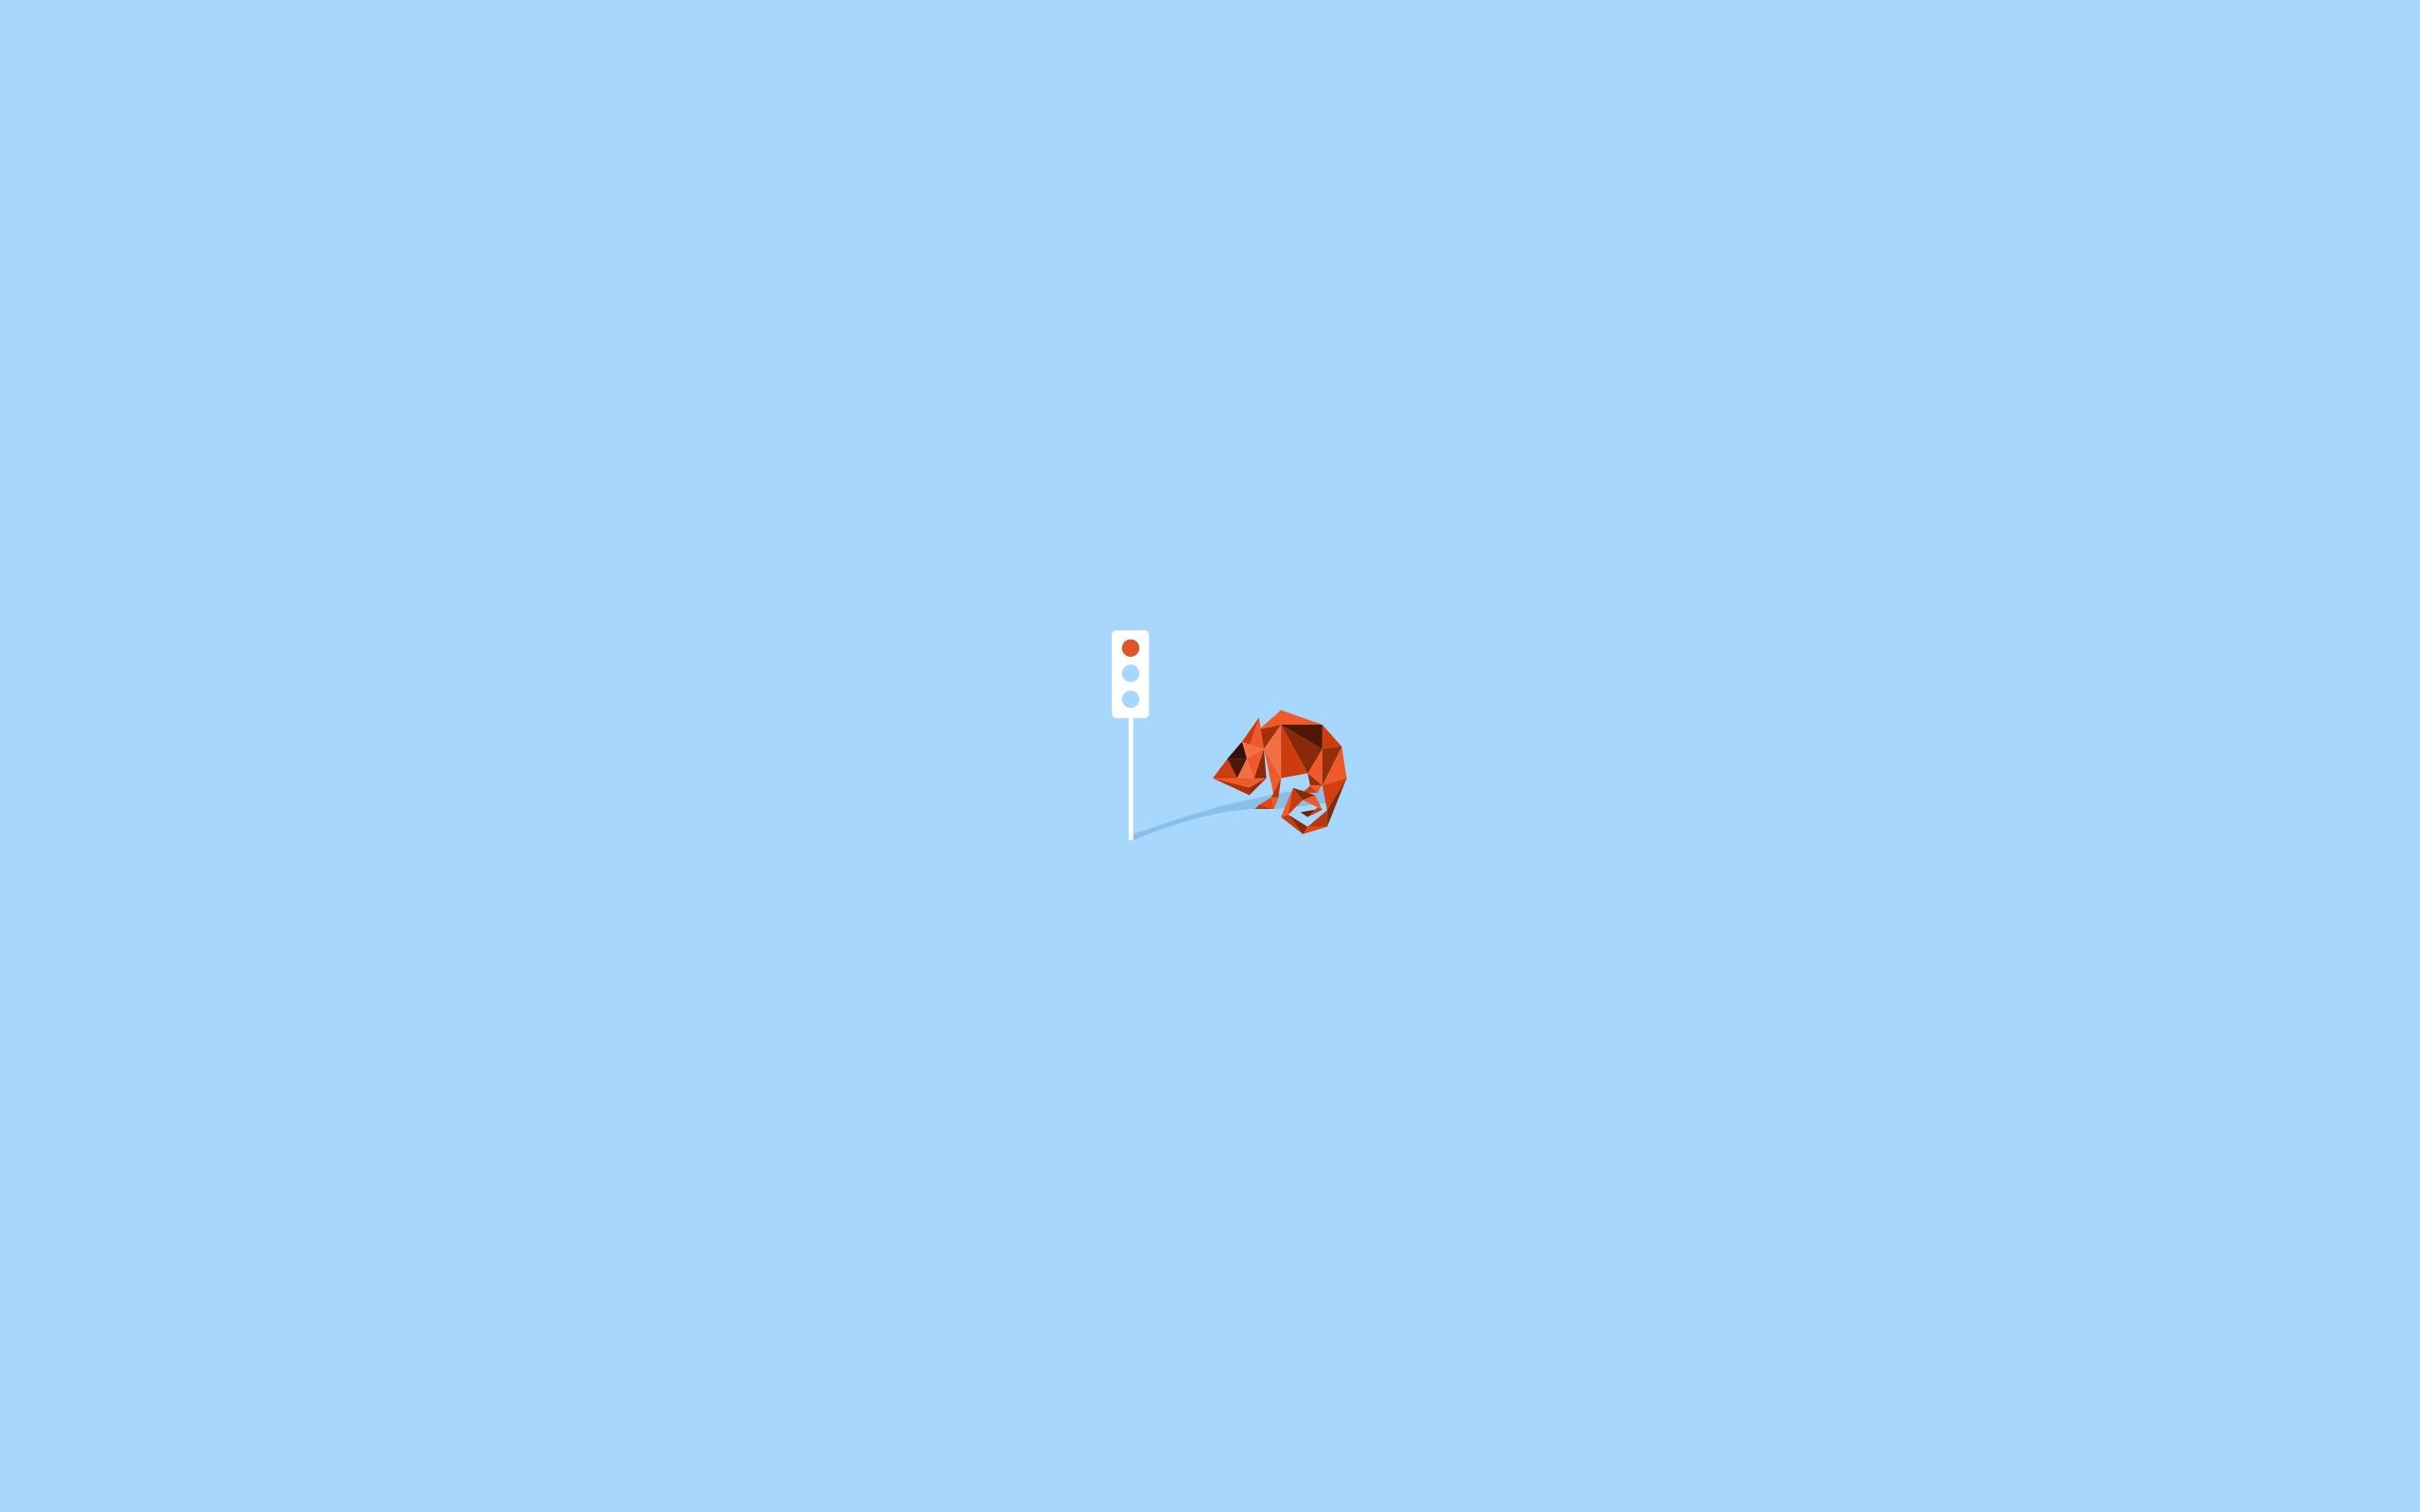 Minimalistic wallpaper of a lobster in a red and white striped shirt - 2560x1600